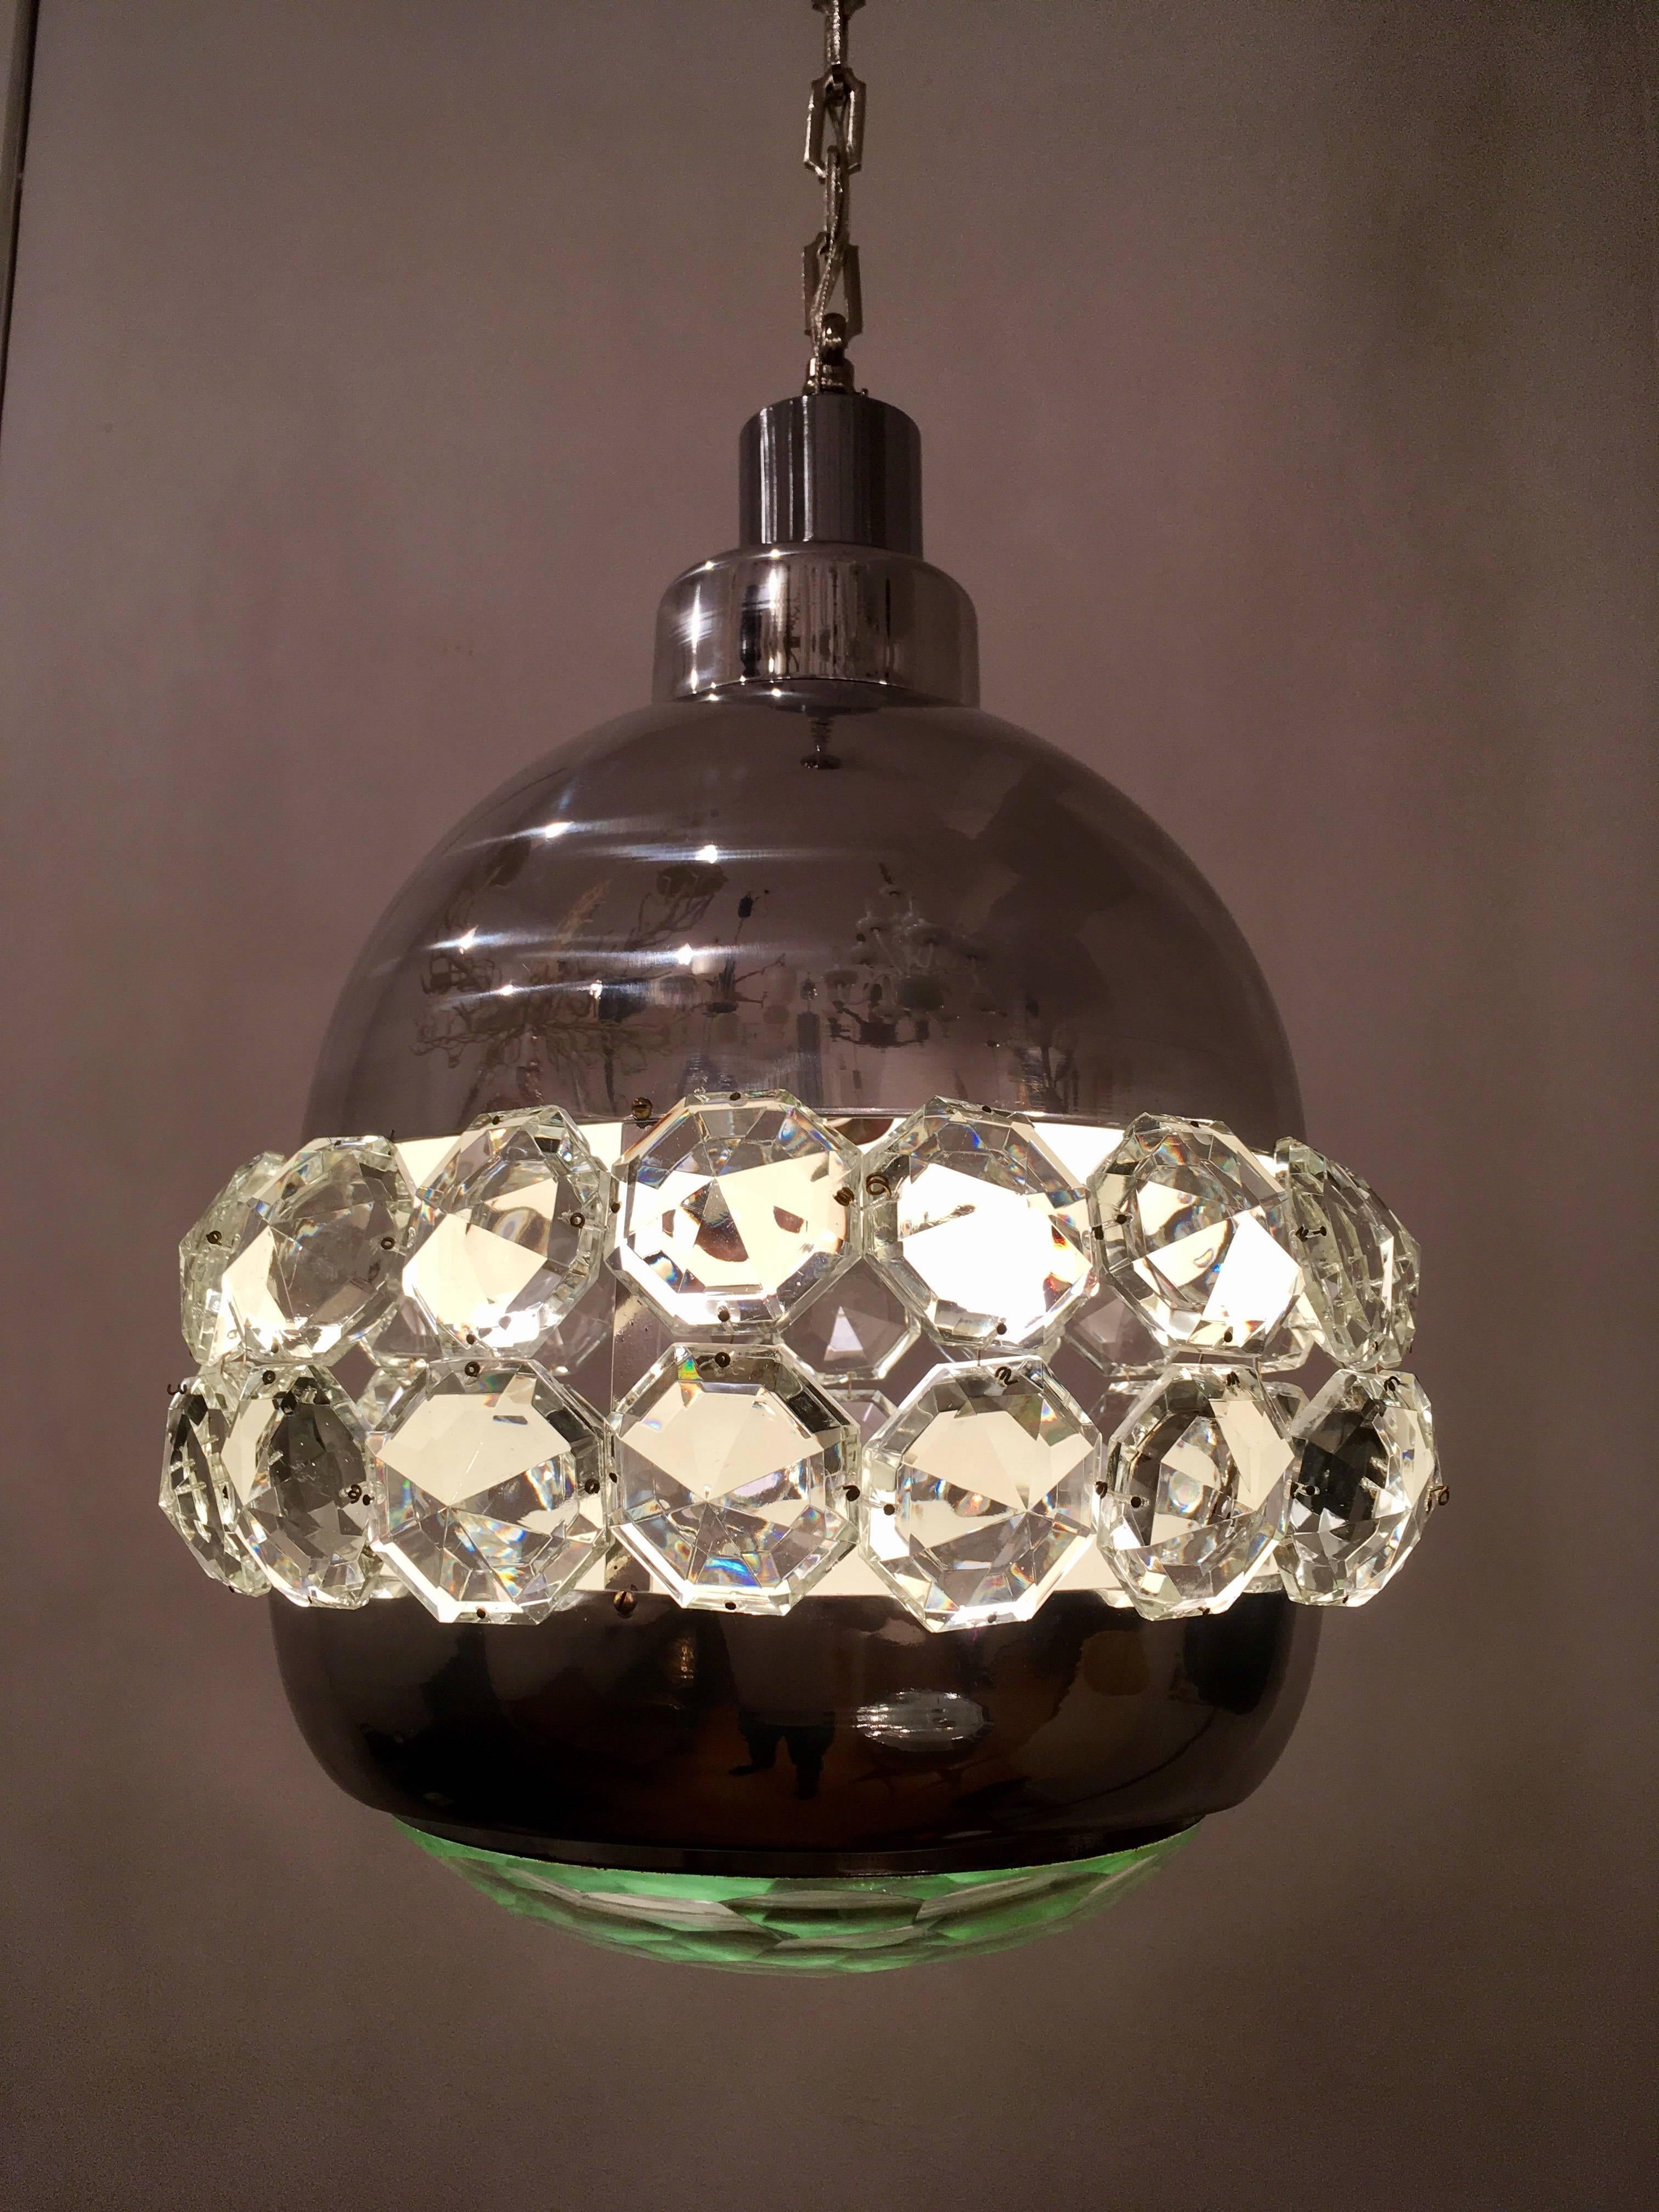 An original 1970s Italian pendant by the famed lighting company, Lumi. The chandelier is composed of a high polished and satin chrome fixture with numerous large thick crystals and one large crystal shade. Newly Rewired.
Overall height 59".